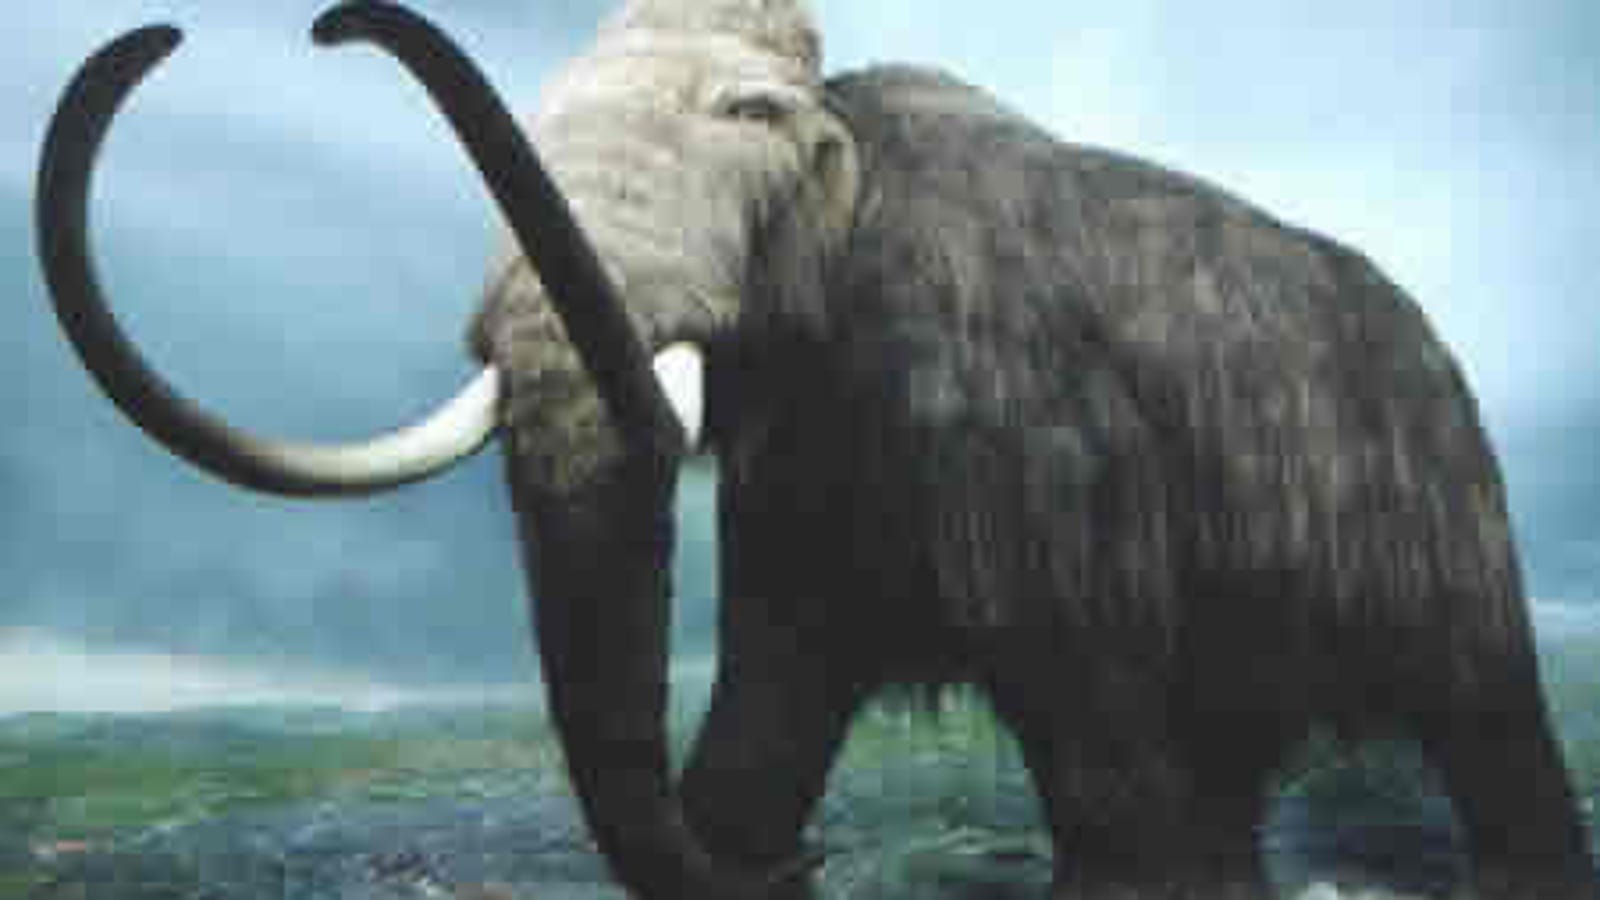 Woolly Mammoths Lived Longer, Died Treedeath, Say Scientists